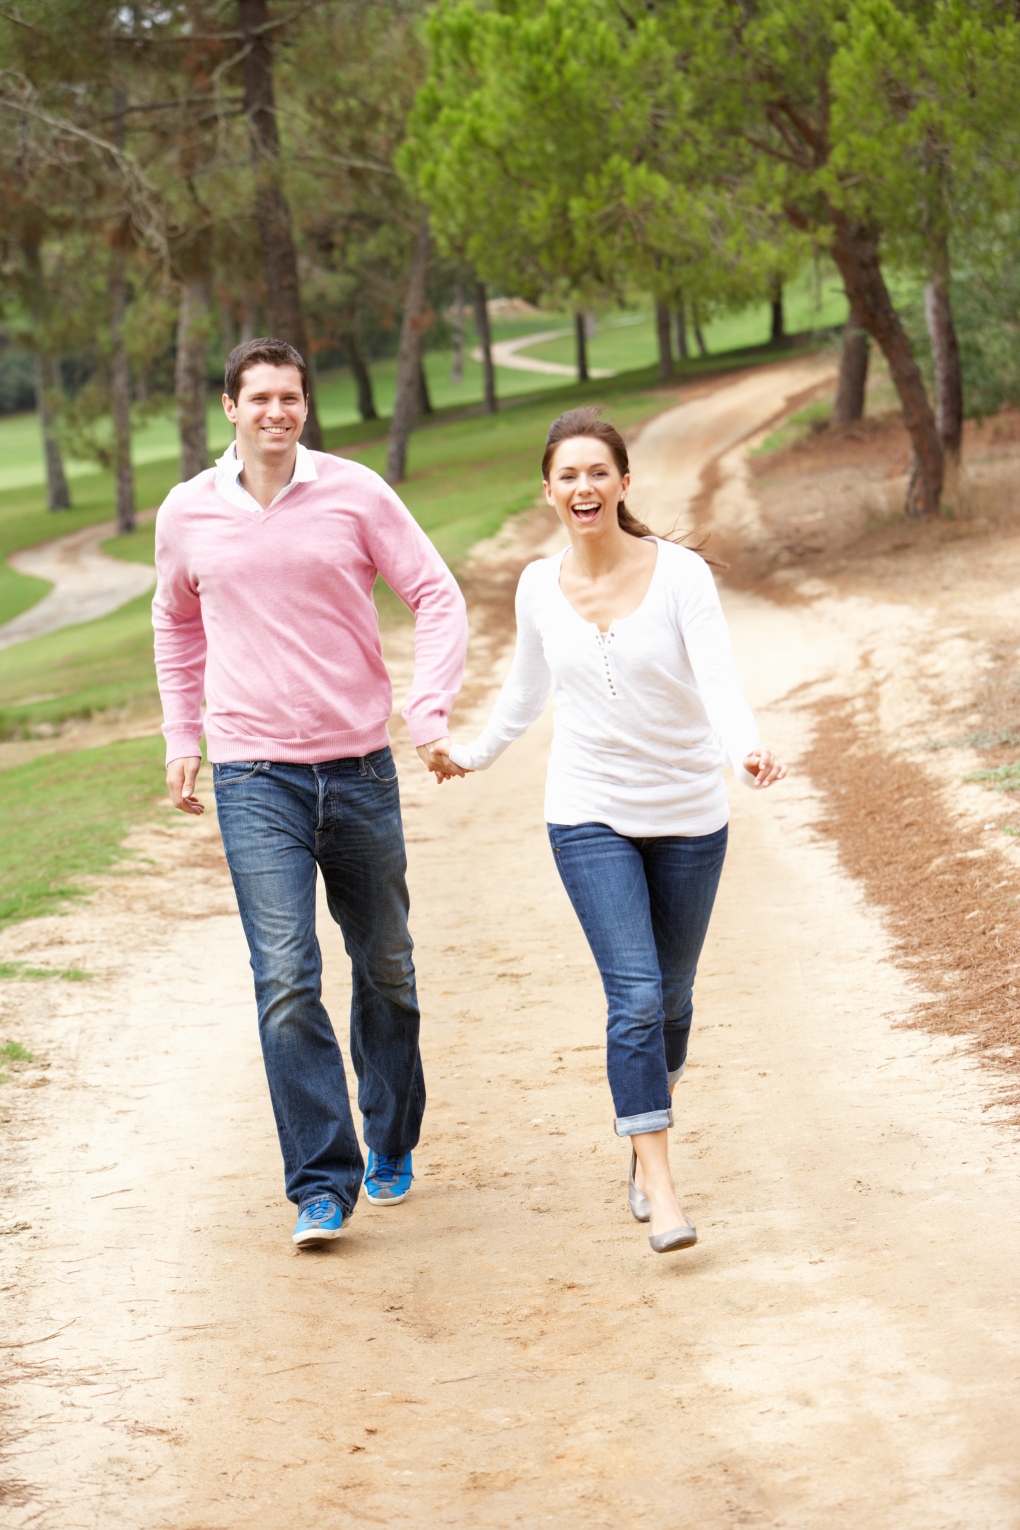 Walking can make you happy, healthy